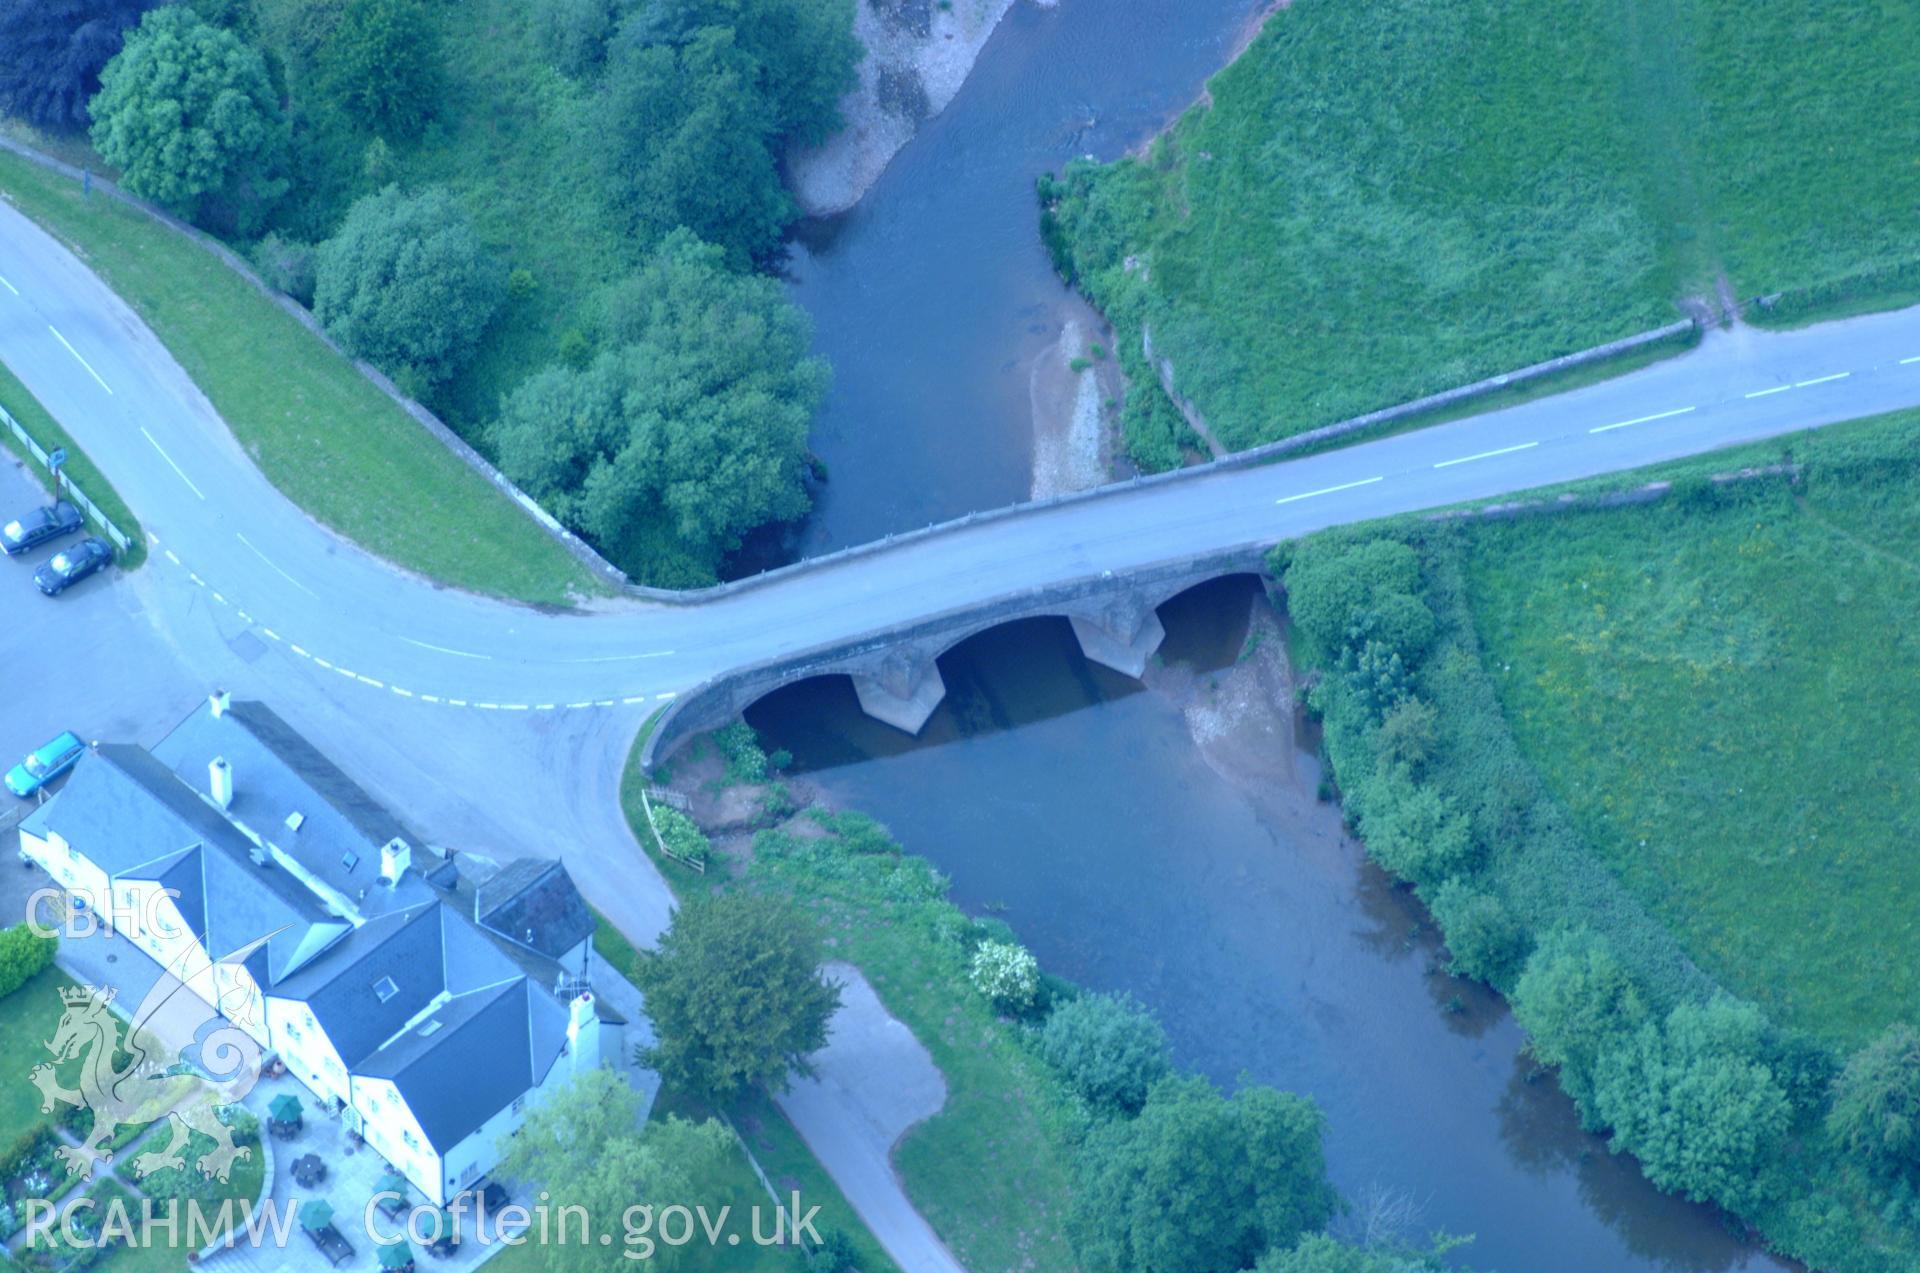 RCAHMW colour oblique aerial photograph of Skenfrith bridge taken on 02/06/2004 by Toby Driver